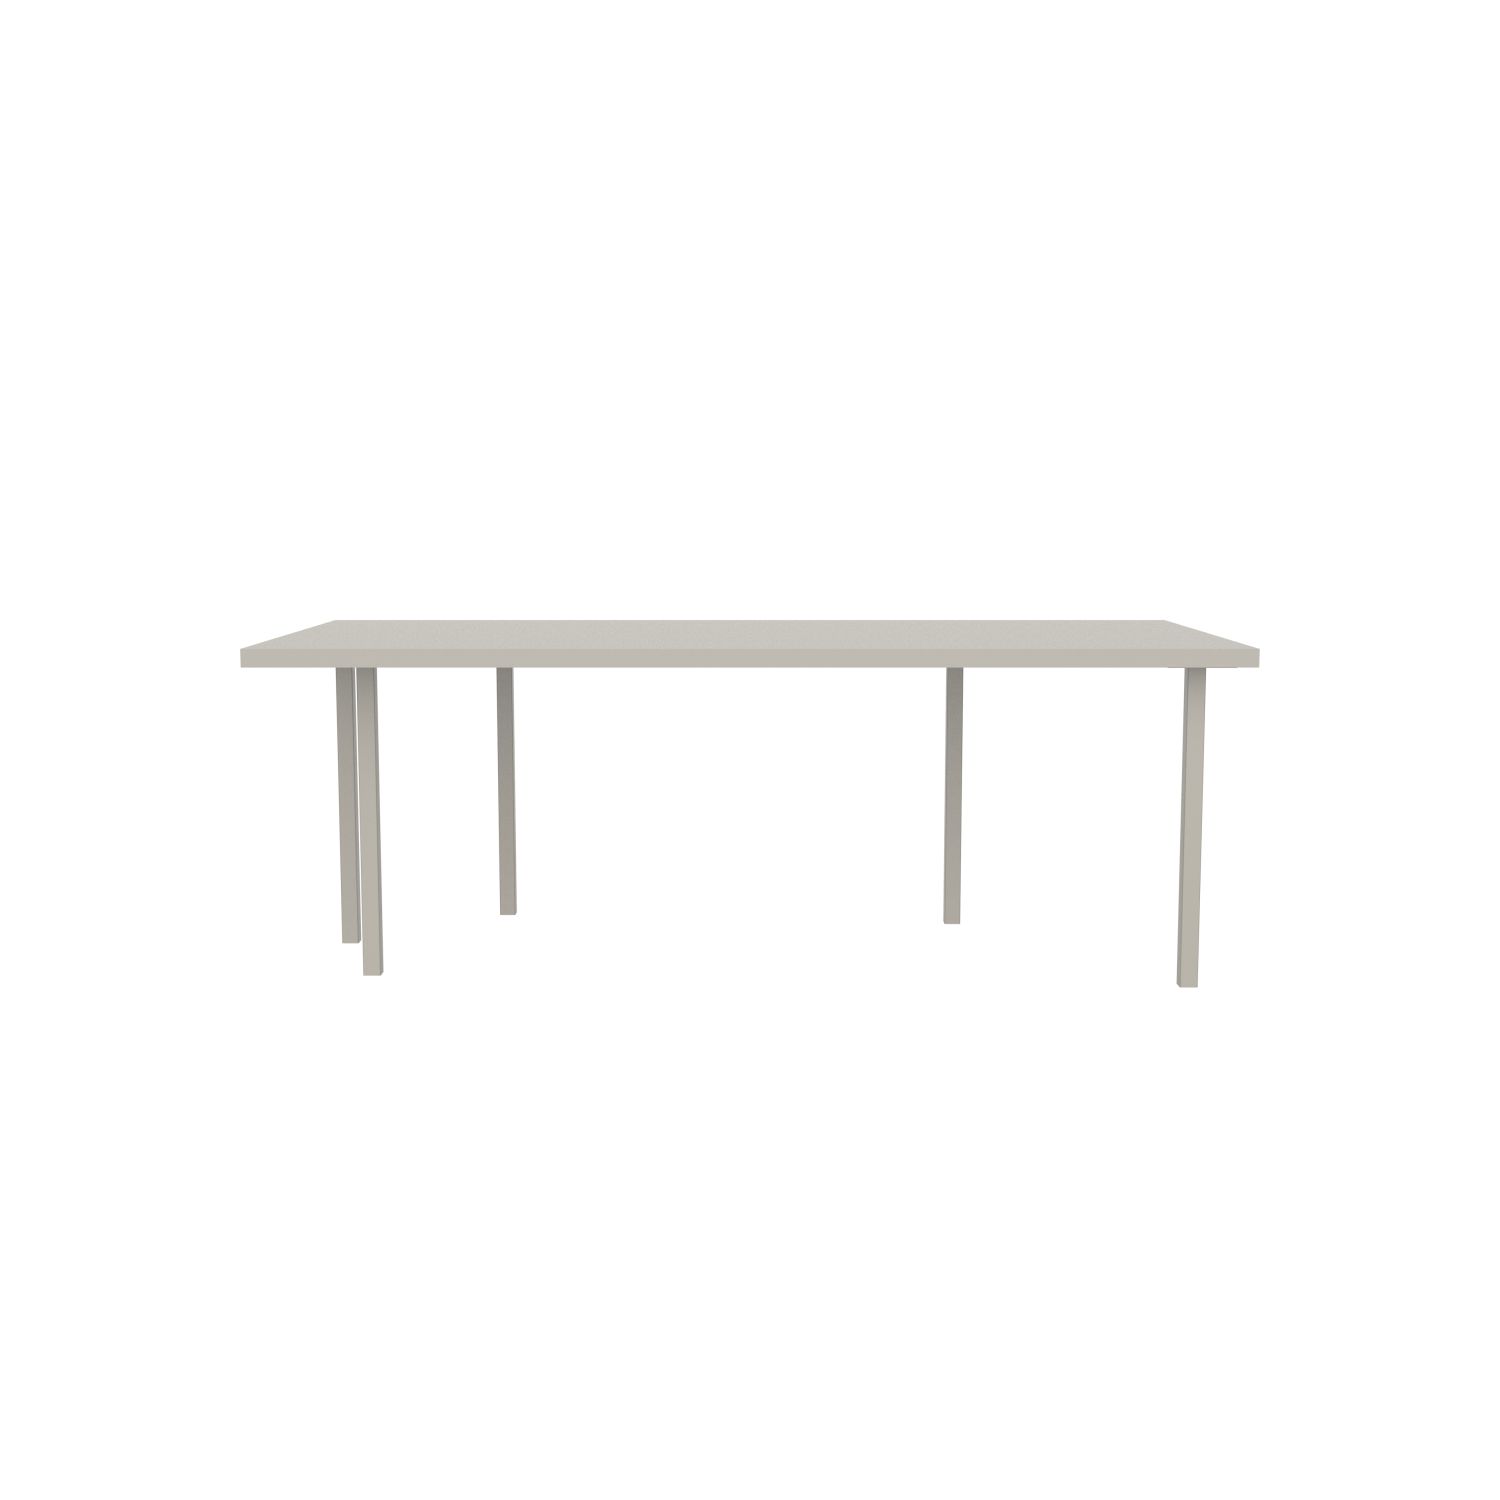 lensvelt bbrand table five fixed heigt 103x218 hpl white 50 mm price level 1 boring grey ral7044